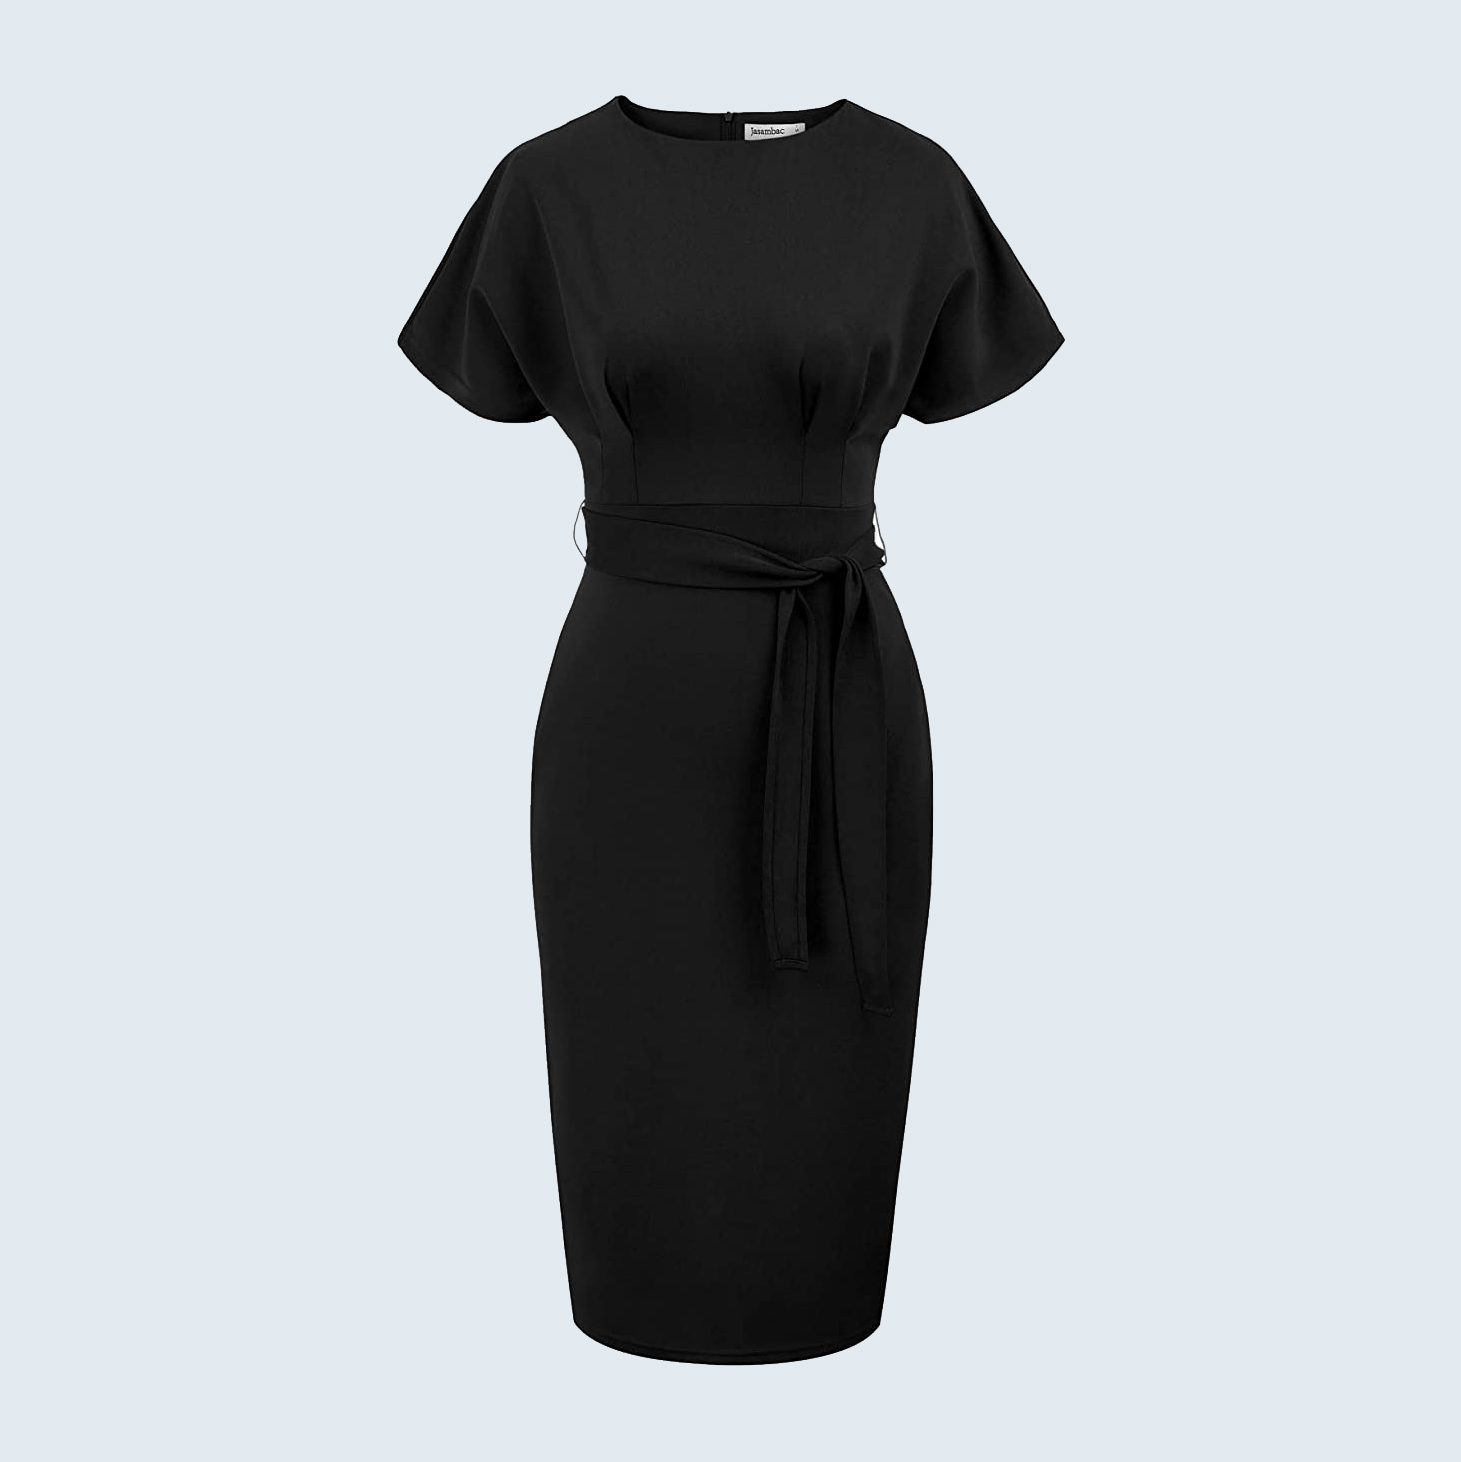 The Best Dresses on Amazon for Returning to Work Reader's Digest